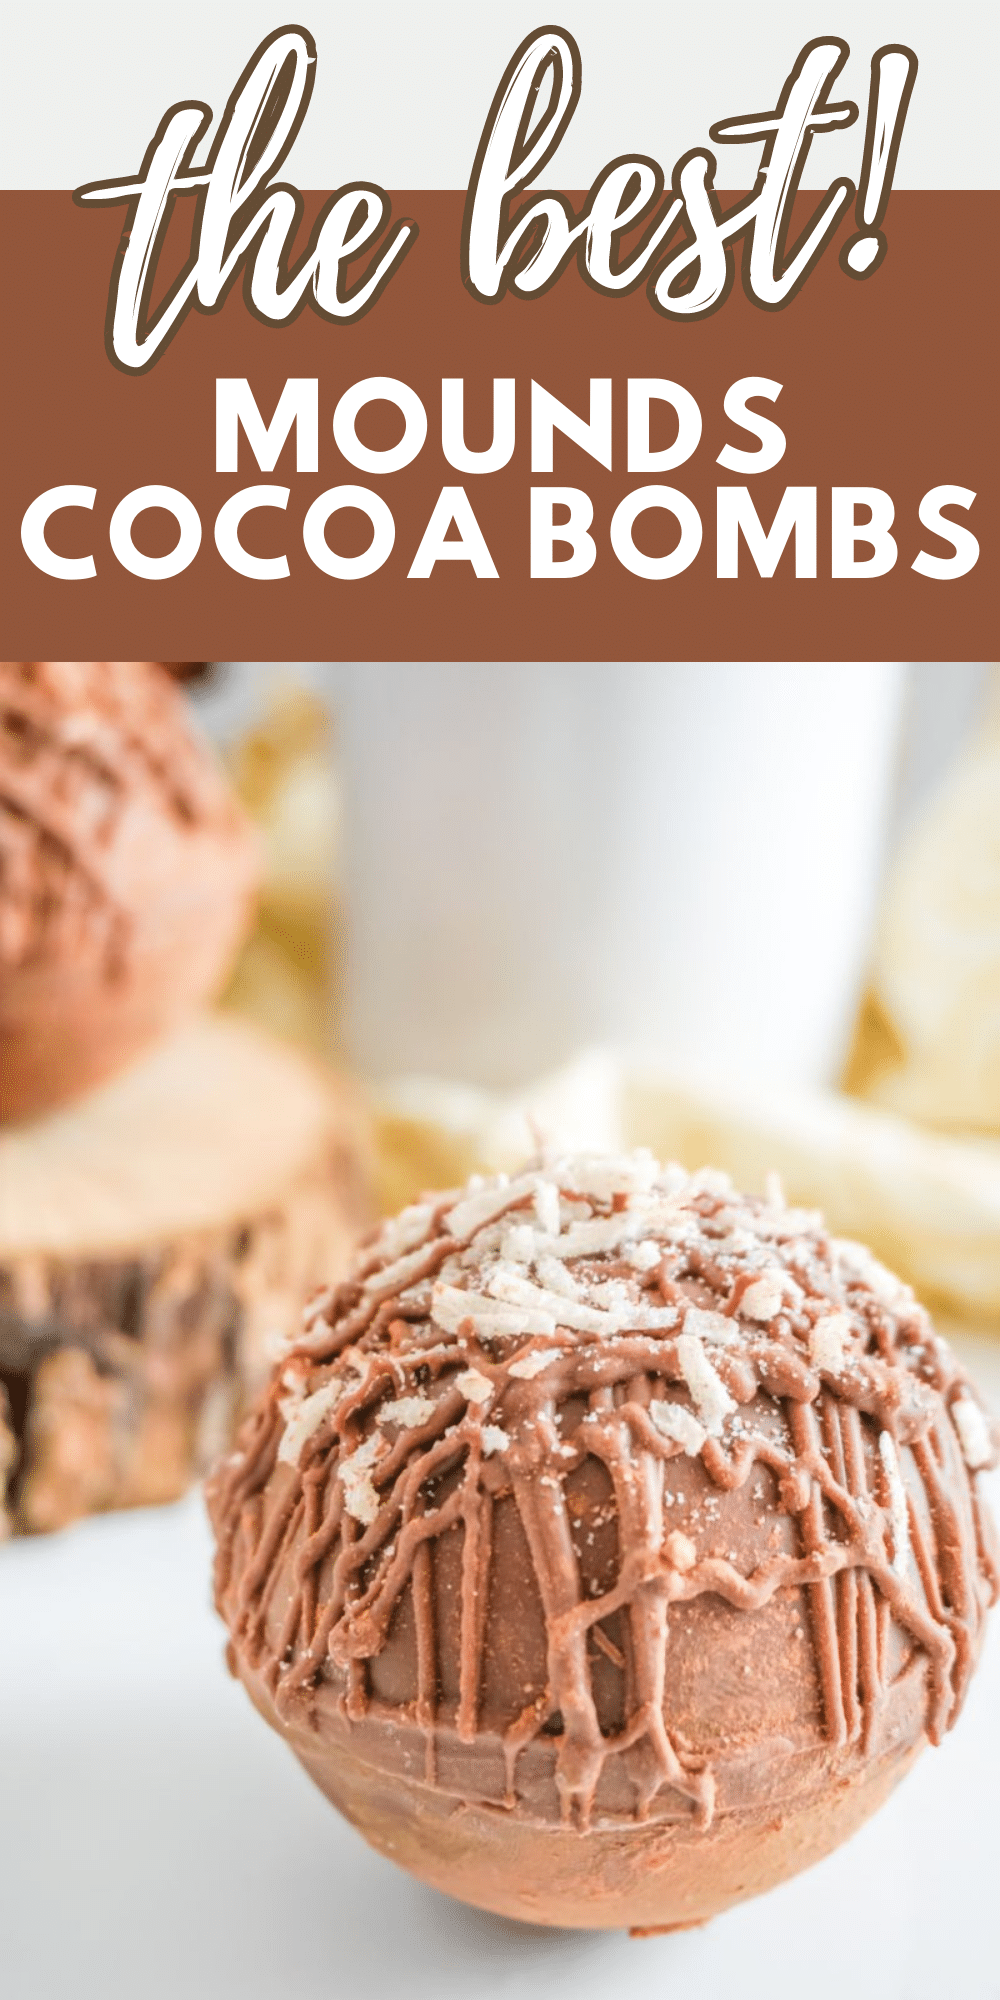 These Mounds Hot Cocoa Bombs will have you loving life. They're an easy way to spruce up that regular cup of hot chocolate. #hotcocoatbombs #hotcocoa #mounds via @wondermomwannab